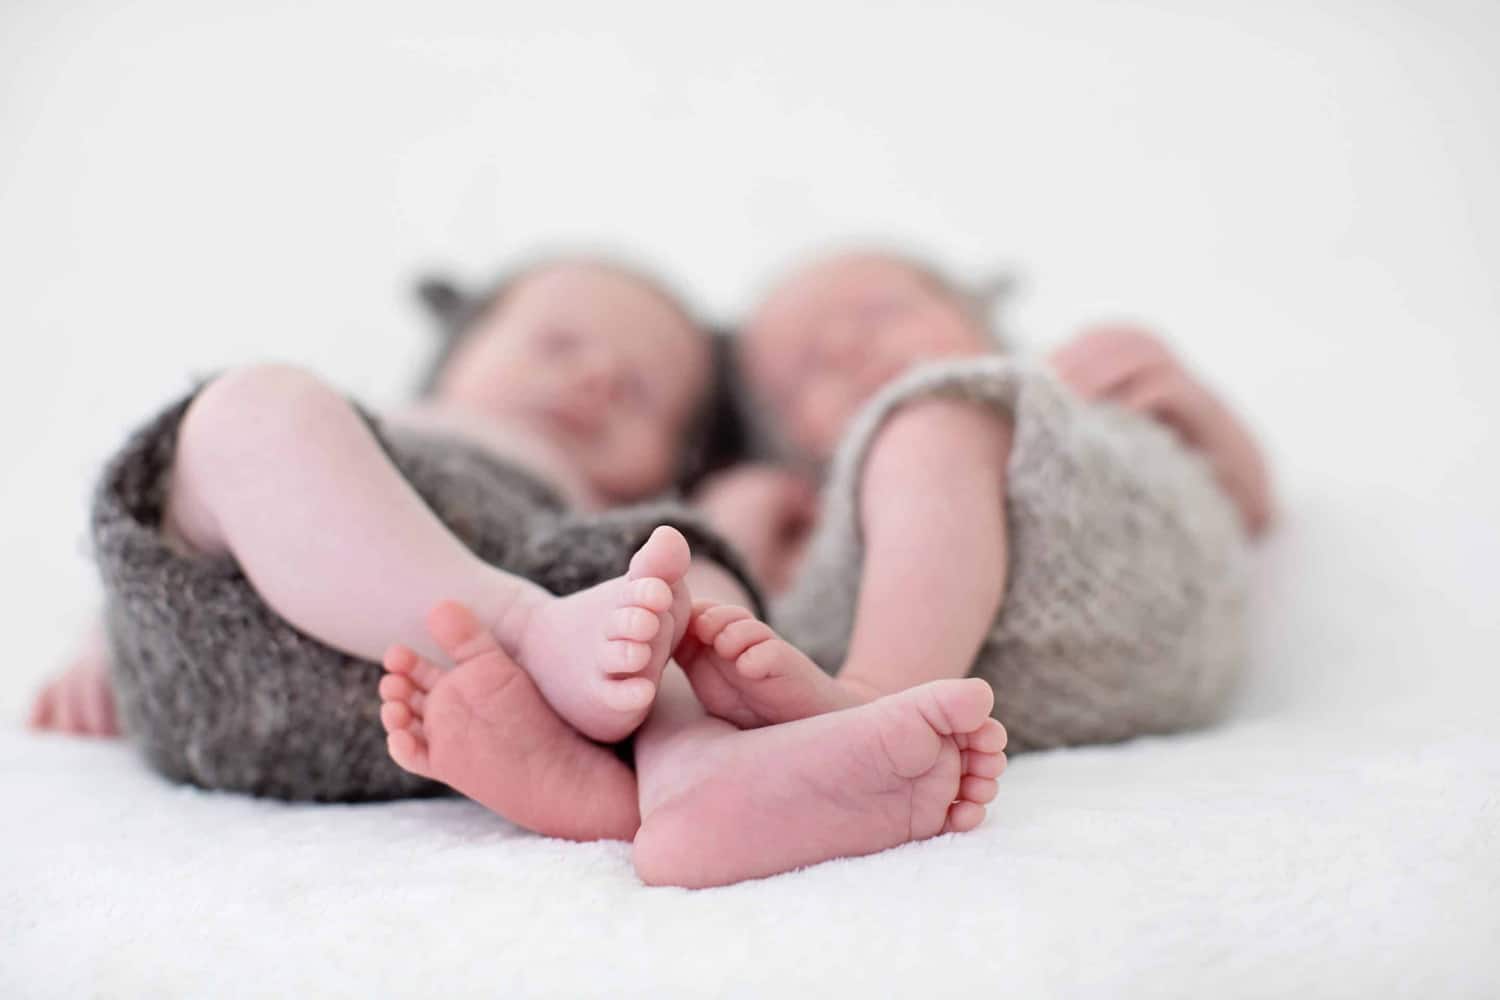 Two newborn babies lay with their feet intertwined.